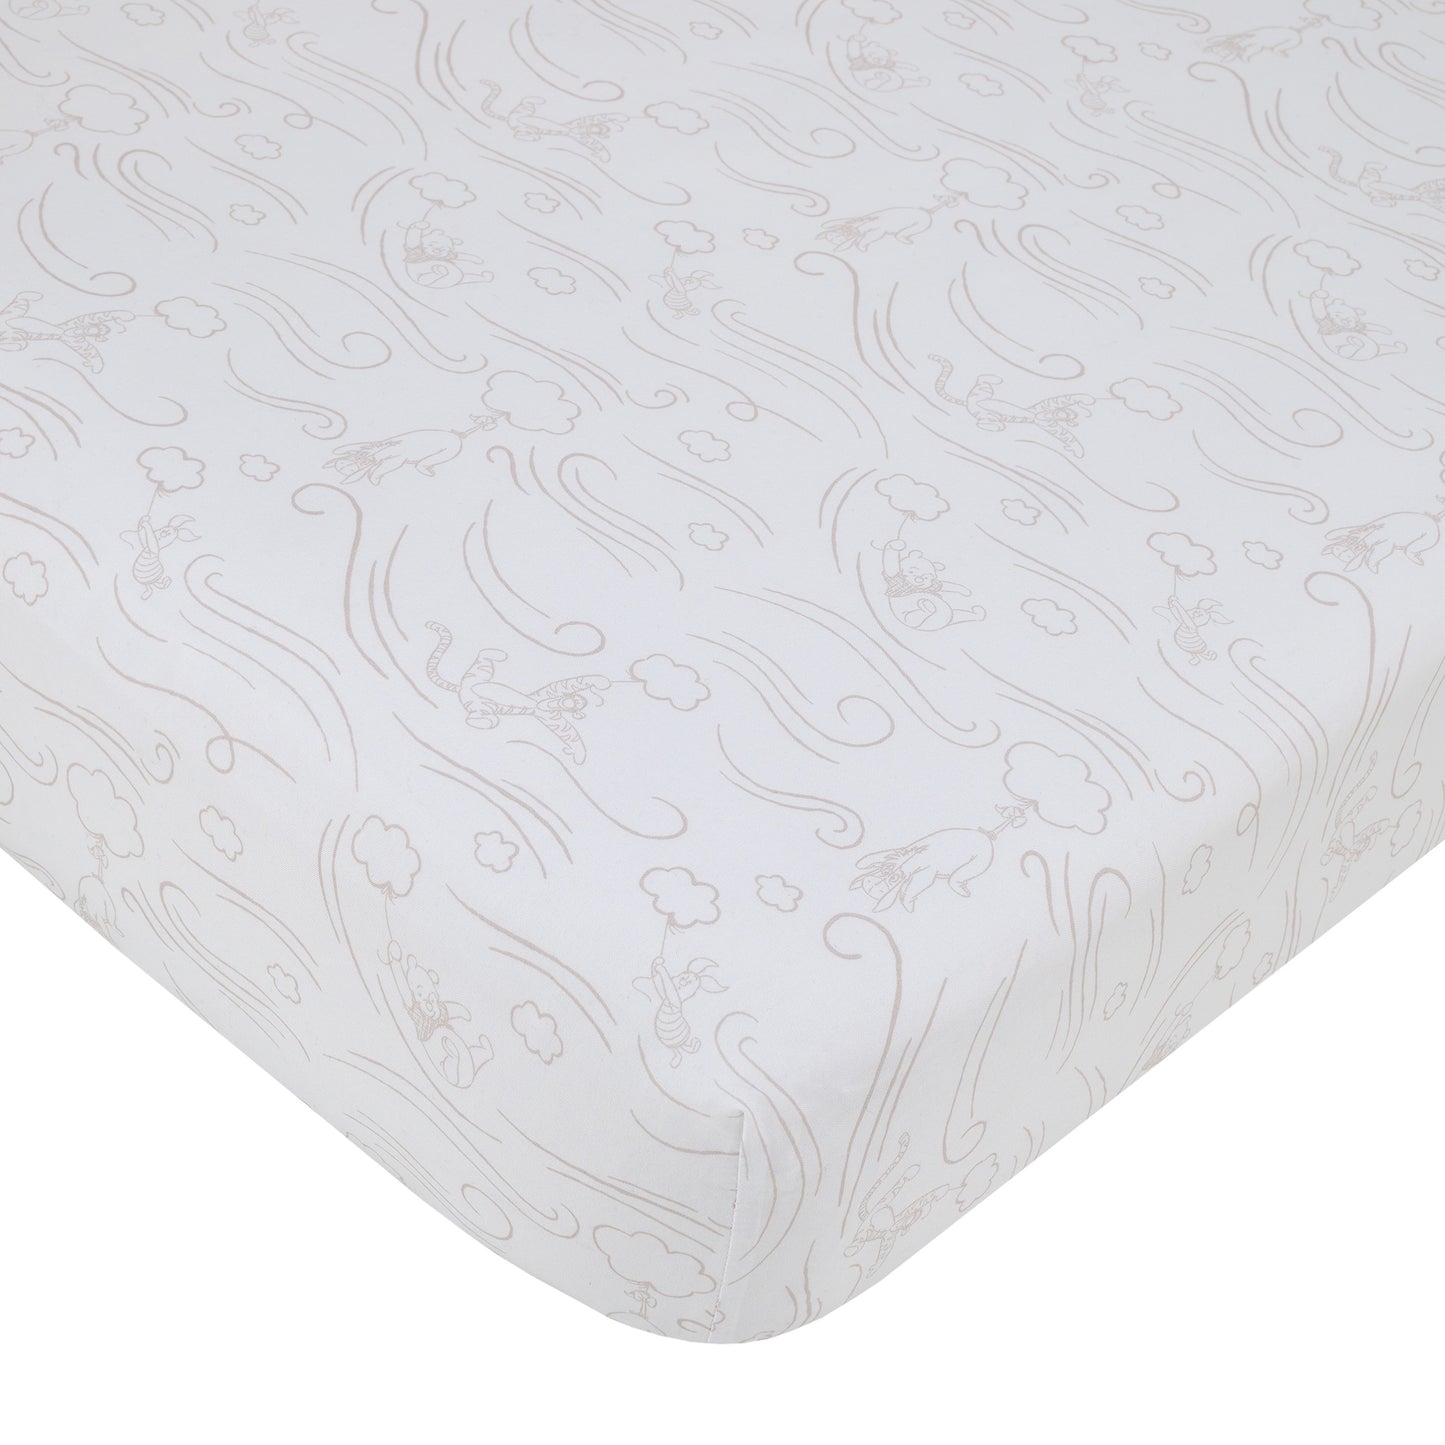 Disney Winnie the Pooh - Blustery Day Grey and White Clouds Fitted Crib Sheet